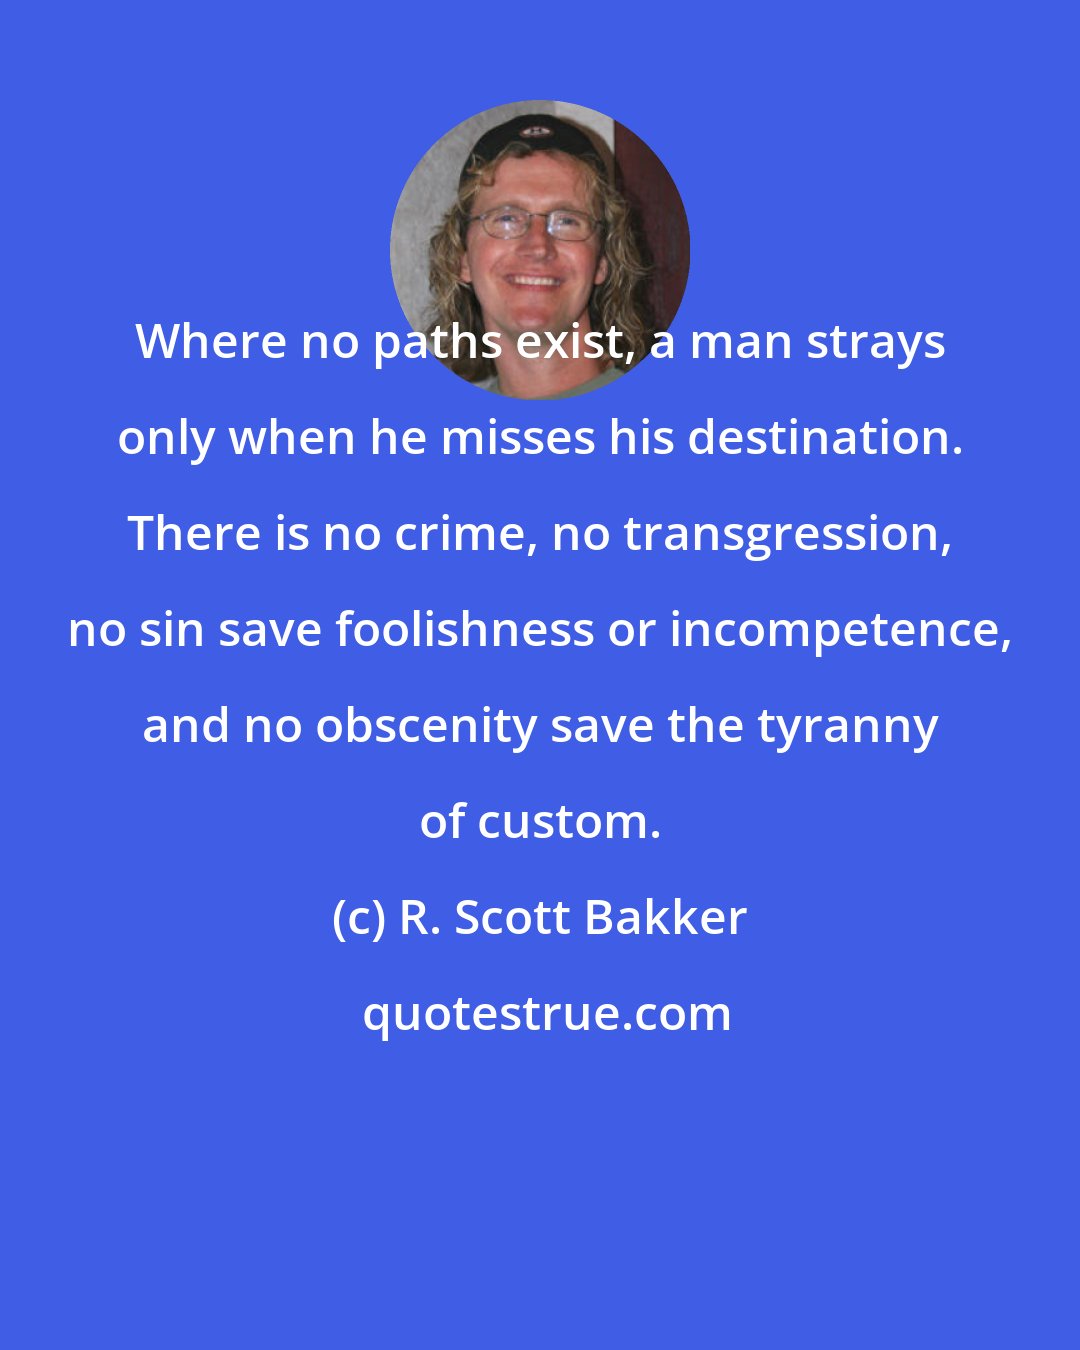 R. Scott Bakker: Where no paths exist, a man strays only when he misses his destination. There is no crime, no transgression, no sin save foolishness or incompetence, and no obscenity save the tyranny of custom.